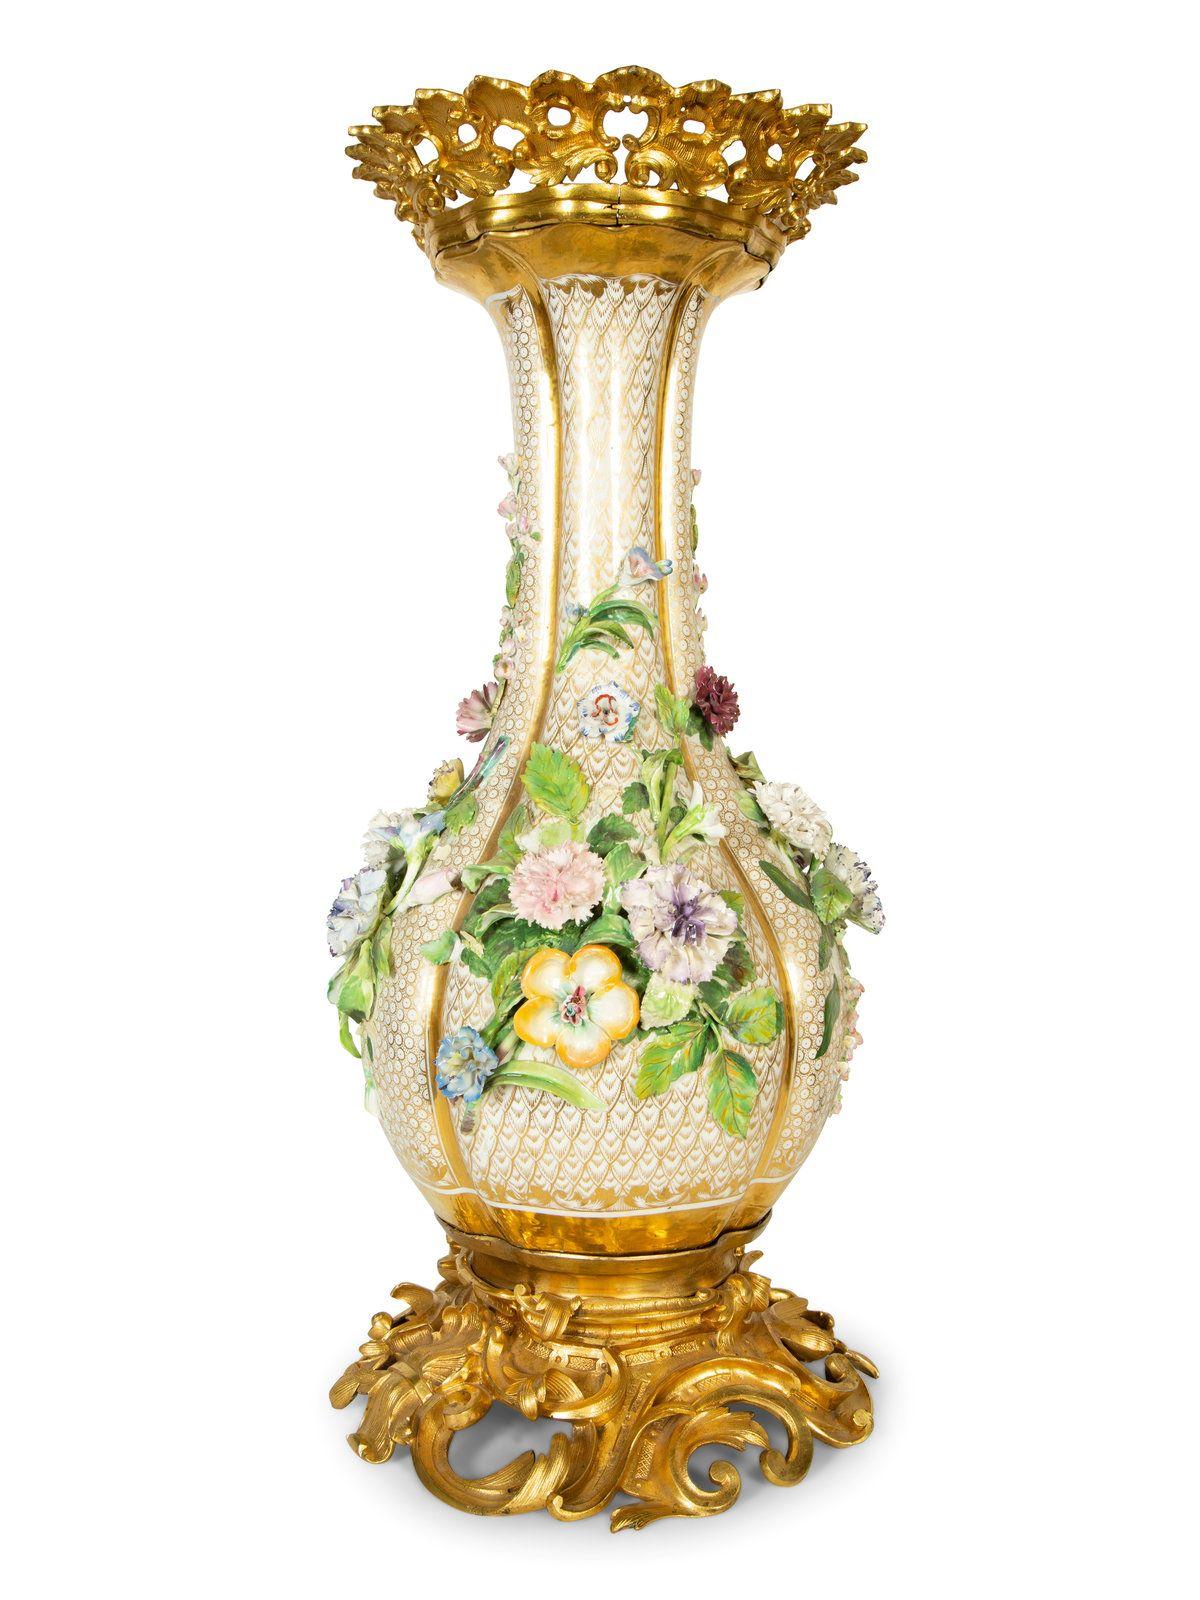 A very impressive French Porcelain vase ornated with applied polychromed flower clusters, with ormolu base and rim. 19th Century
Measures: Height 26